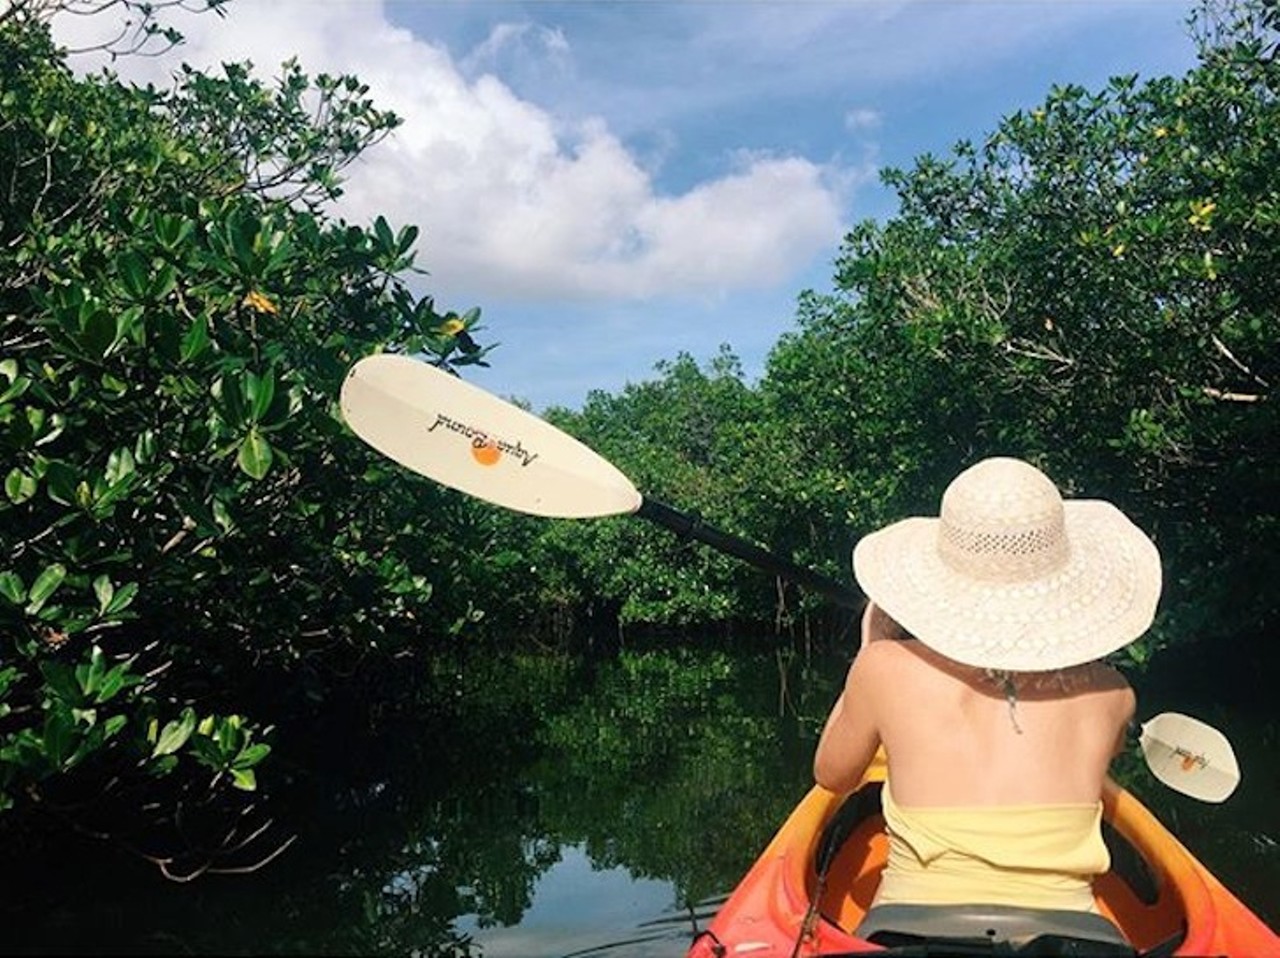 ROUND ISLAND BEACH PARK
Round Island has some of the best observation decks in the state, but we still recommend getting yourself out in a kayak to see a school of Florida manatees. Pull the boat up to one of their ramps and go fishin'.
Distance: 1 hour and 55 minutes
Photo via yunaheart/Instagram